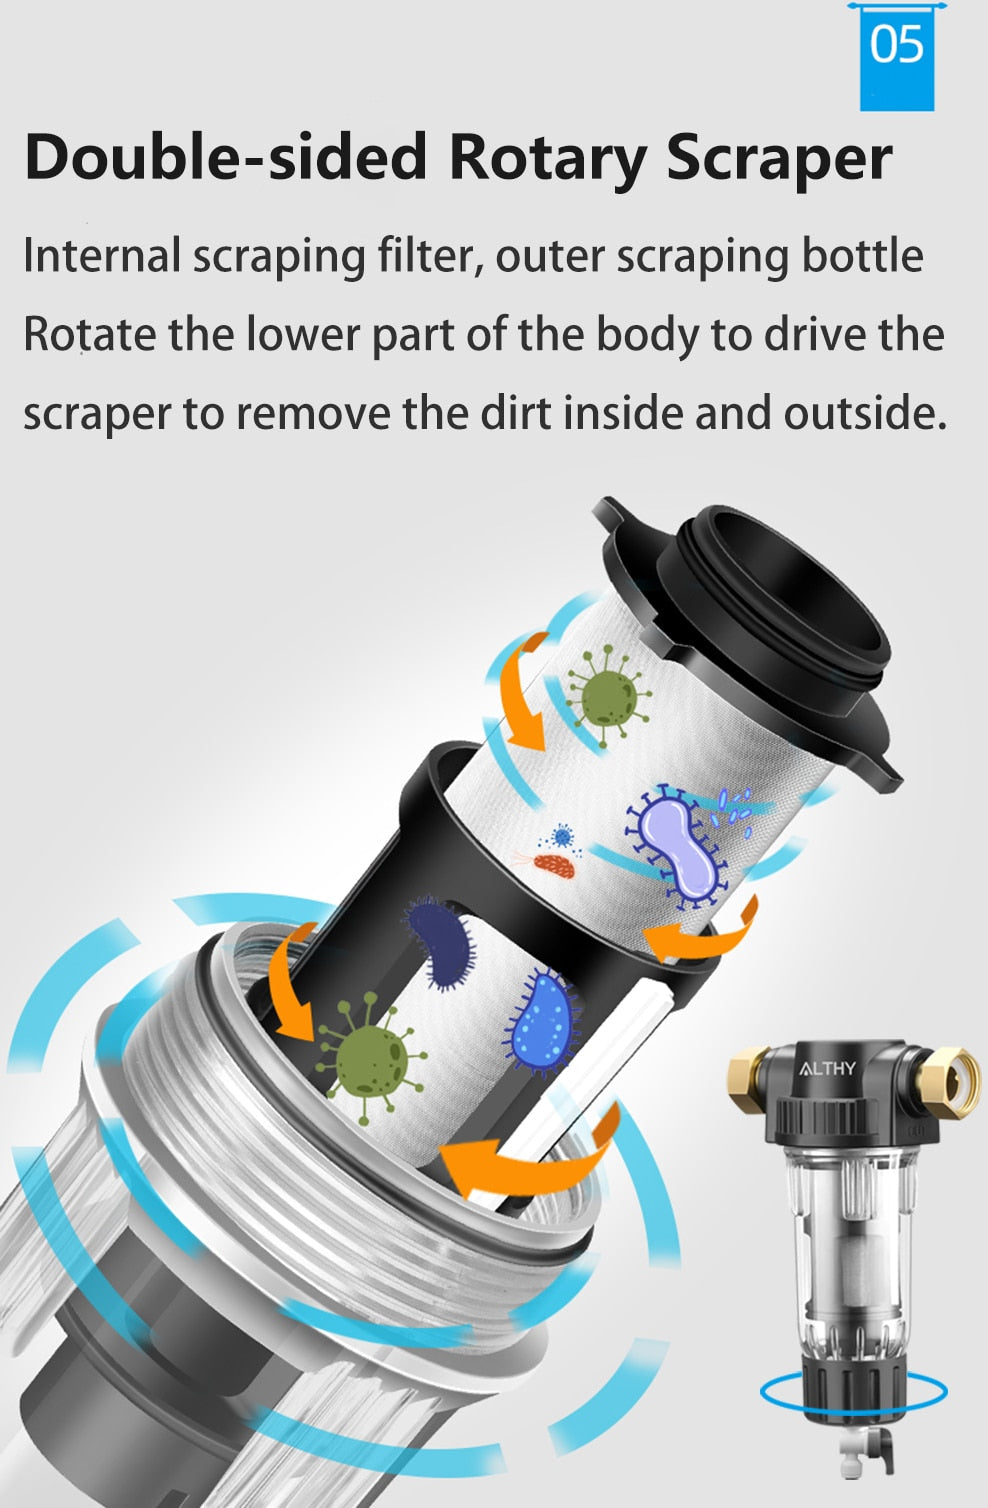 ALTHY Pre filter Whole House Spin Down Sediment Water Filter Central Prefilter Purifier System Backwash Stainless Steel Mesh  Hardware > Plumbing > Water Dispensing & Filtration 184.99 EZYSELLA SHOP